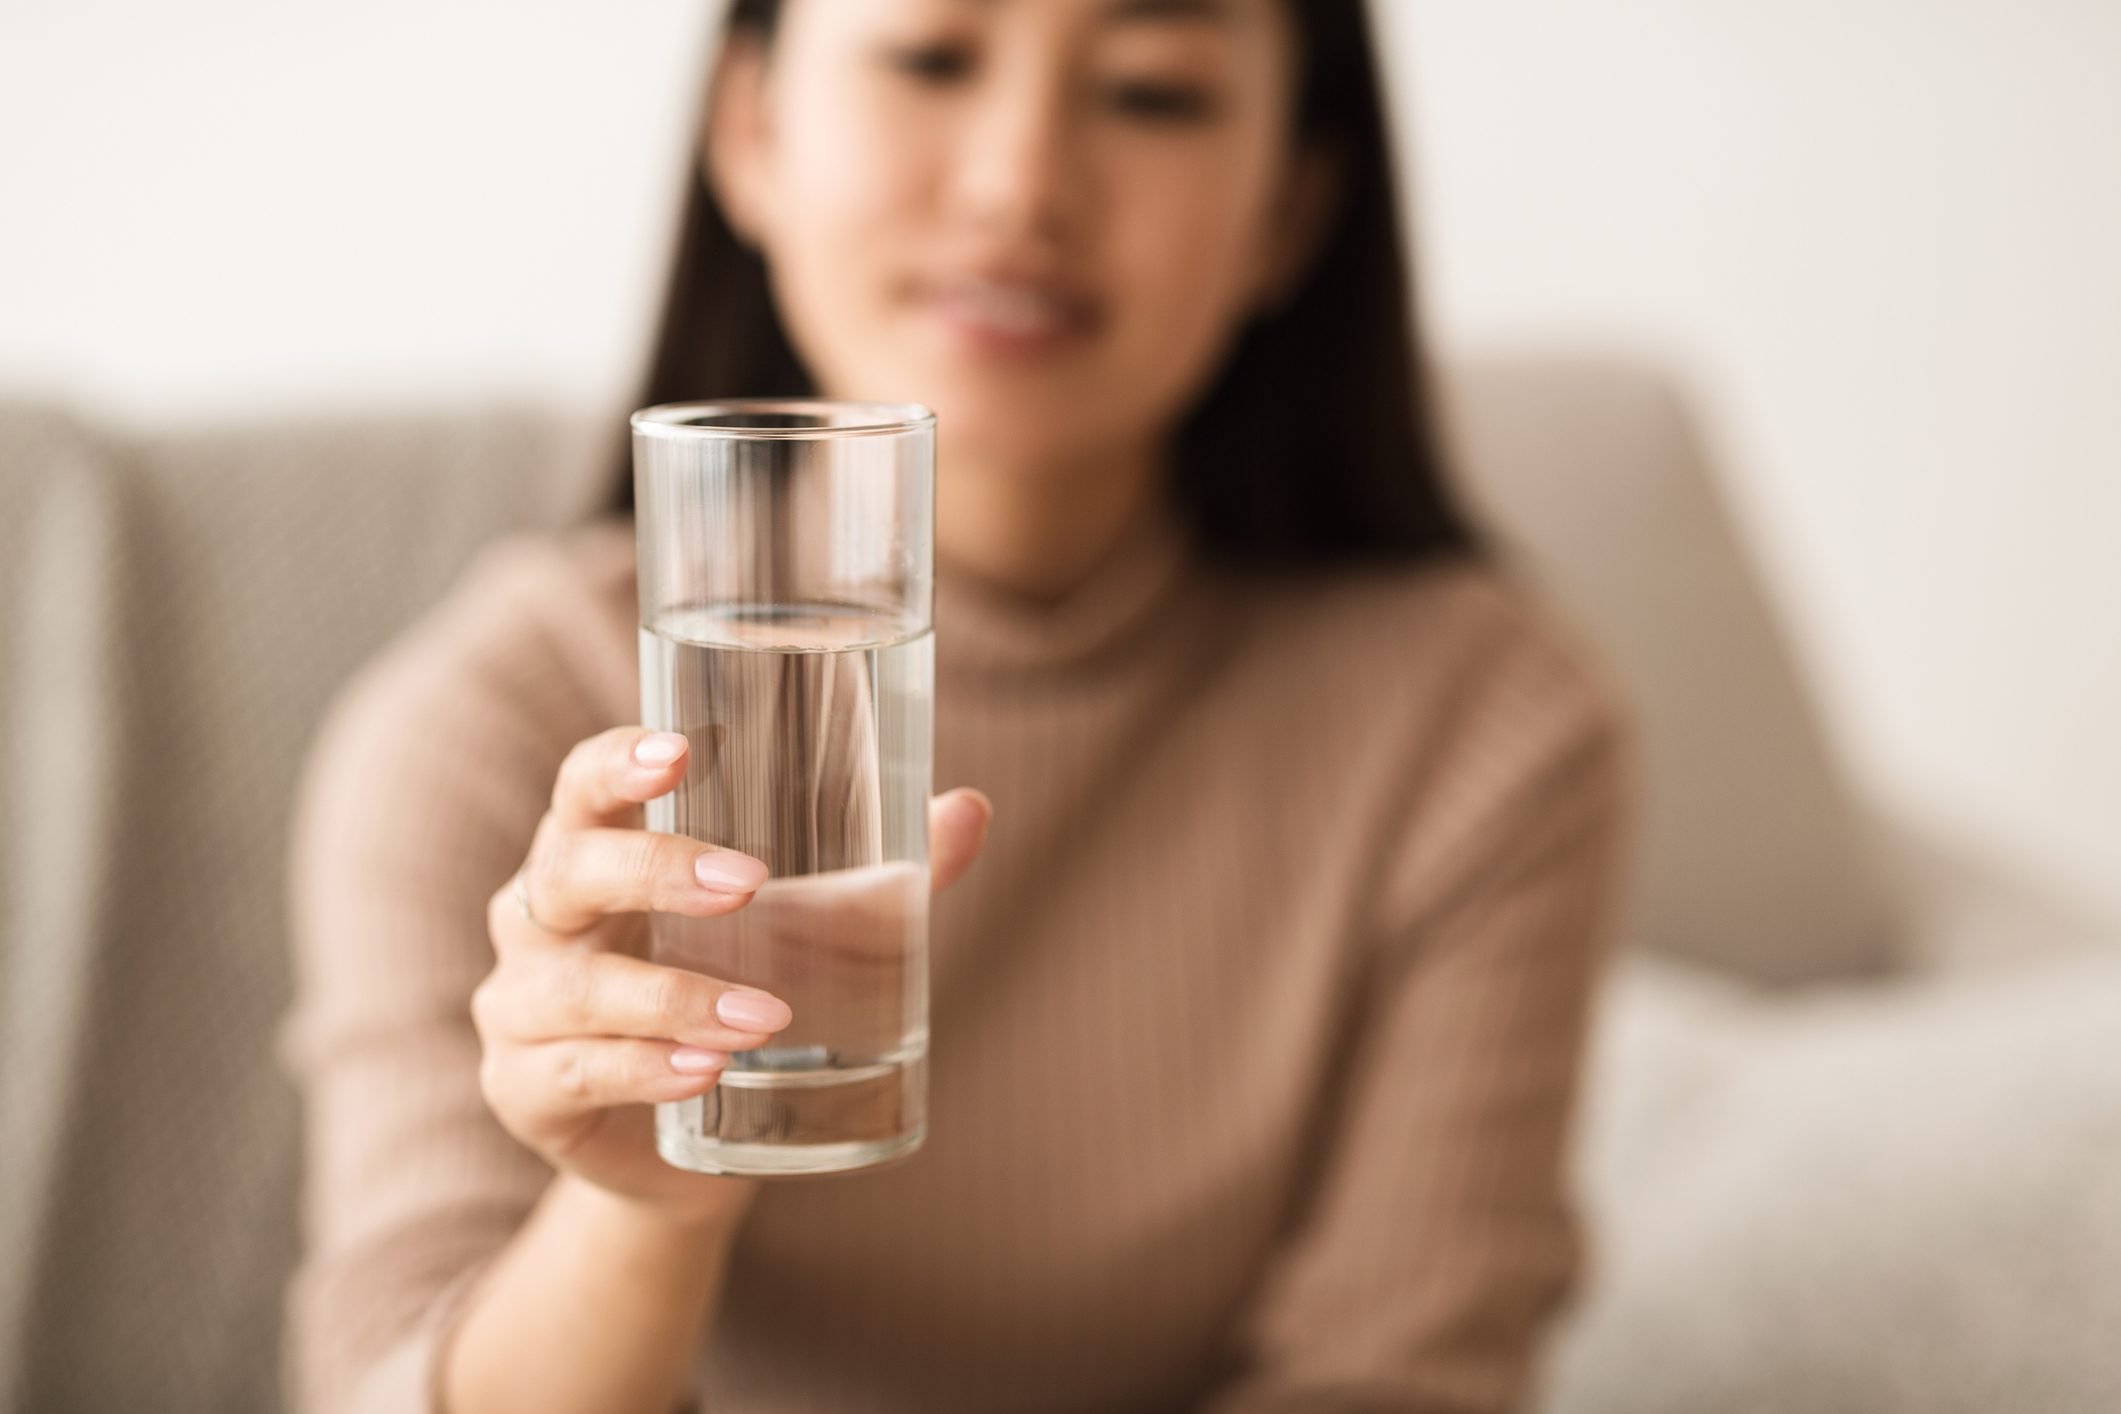 Can You Drink Water While Fasting?